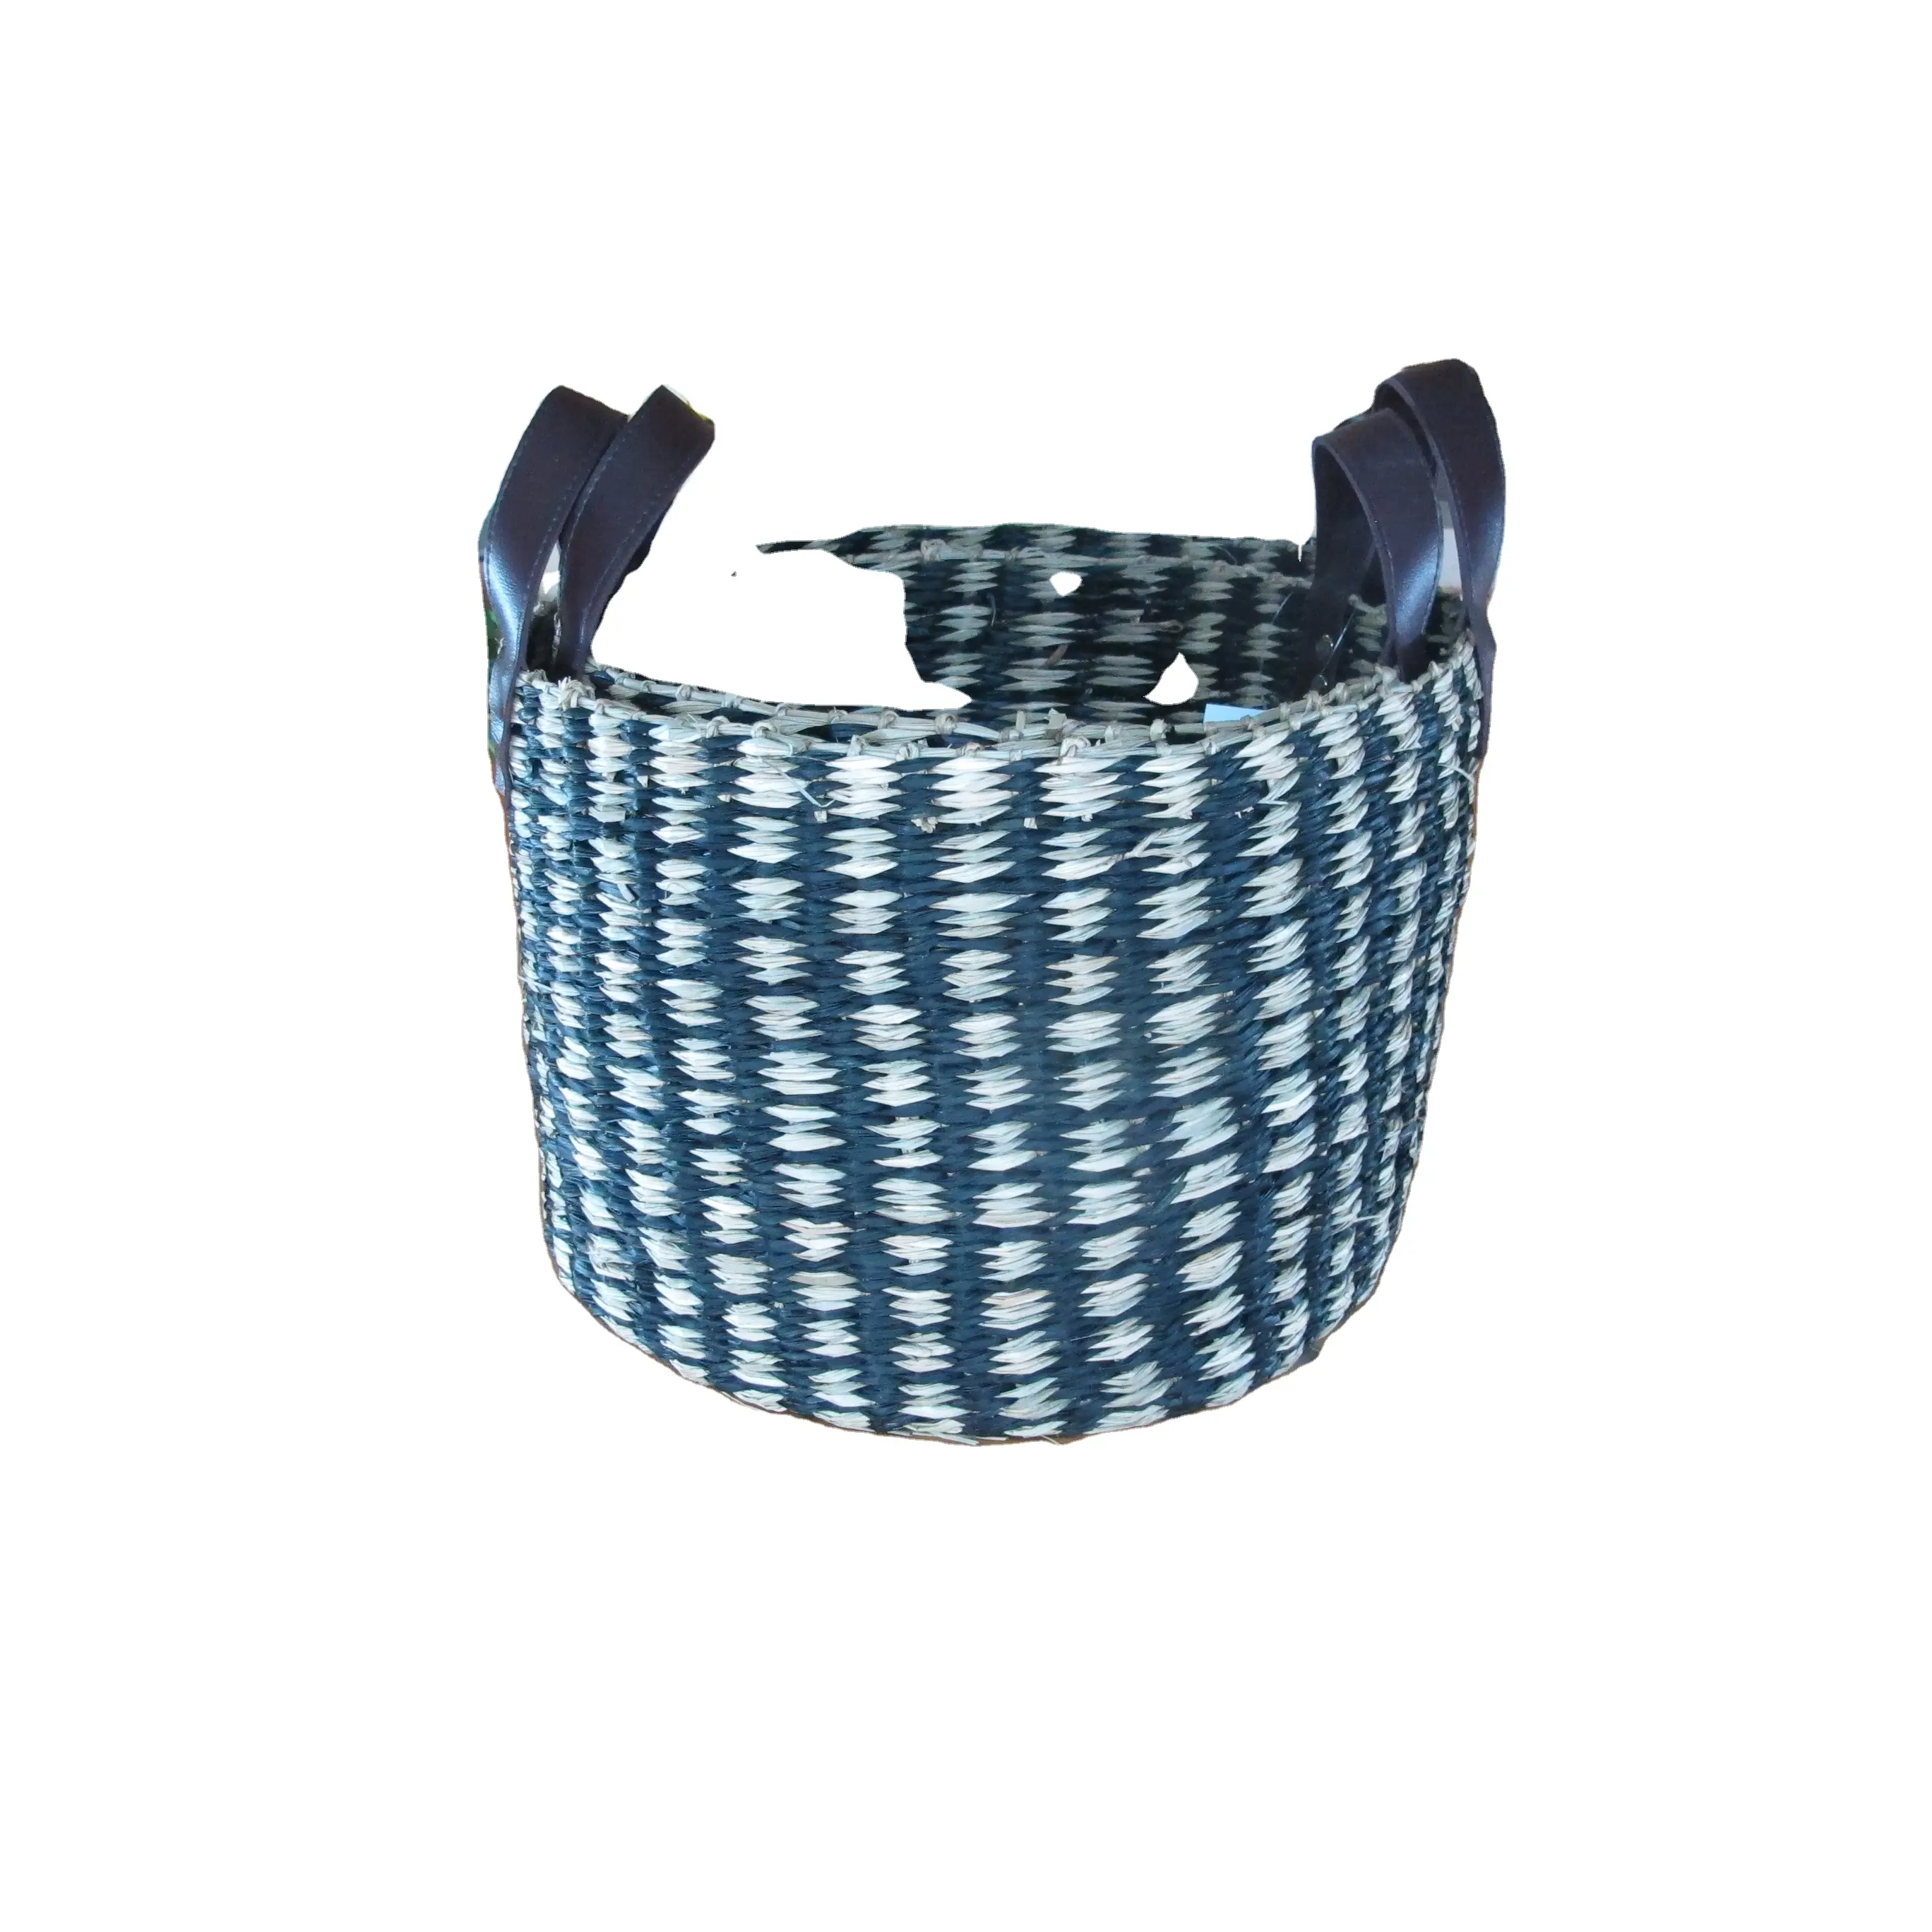 High quality best seller seagrass storage basket with handles wholesale Willow Picnic Hamper Basket Rattan Food Gift Storage